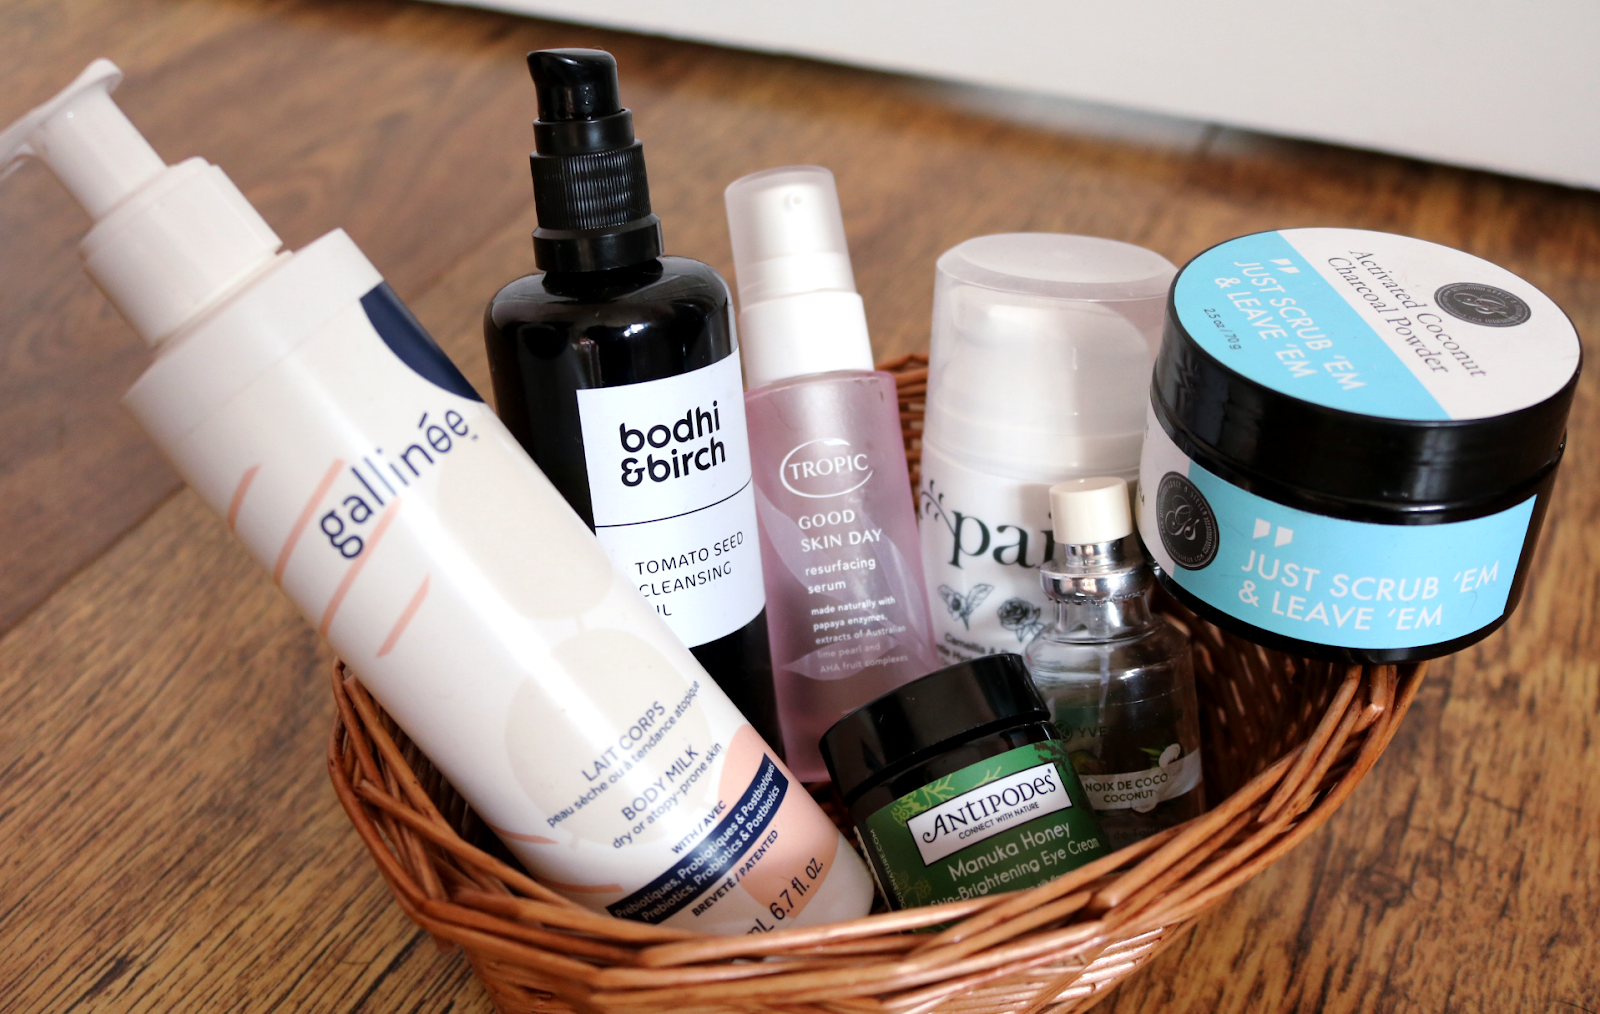 October Empties: Products I've Used Up